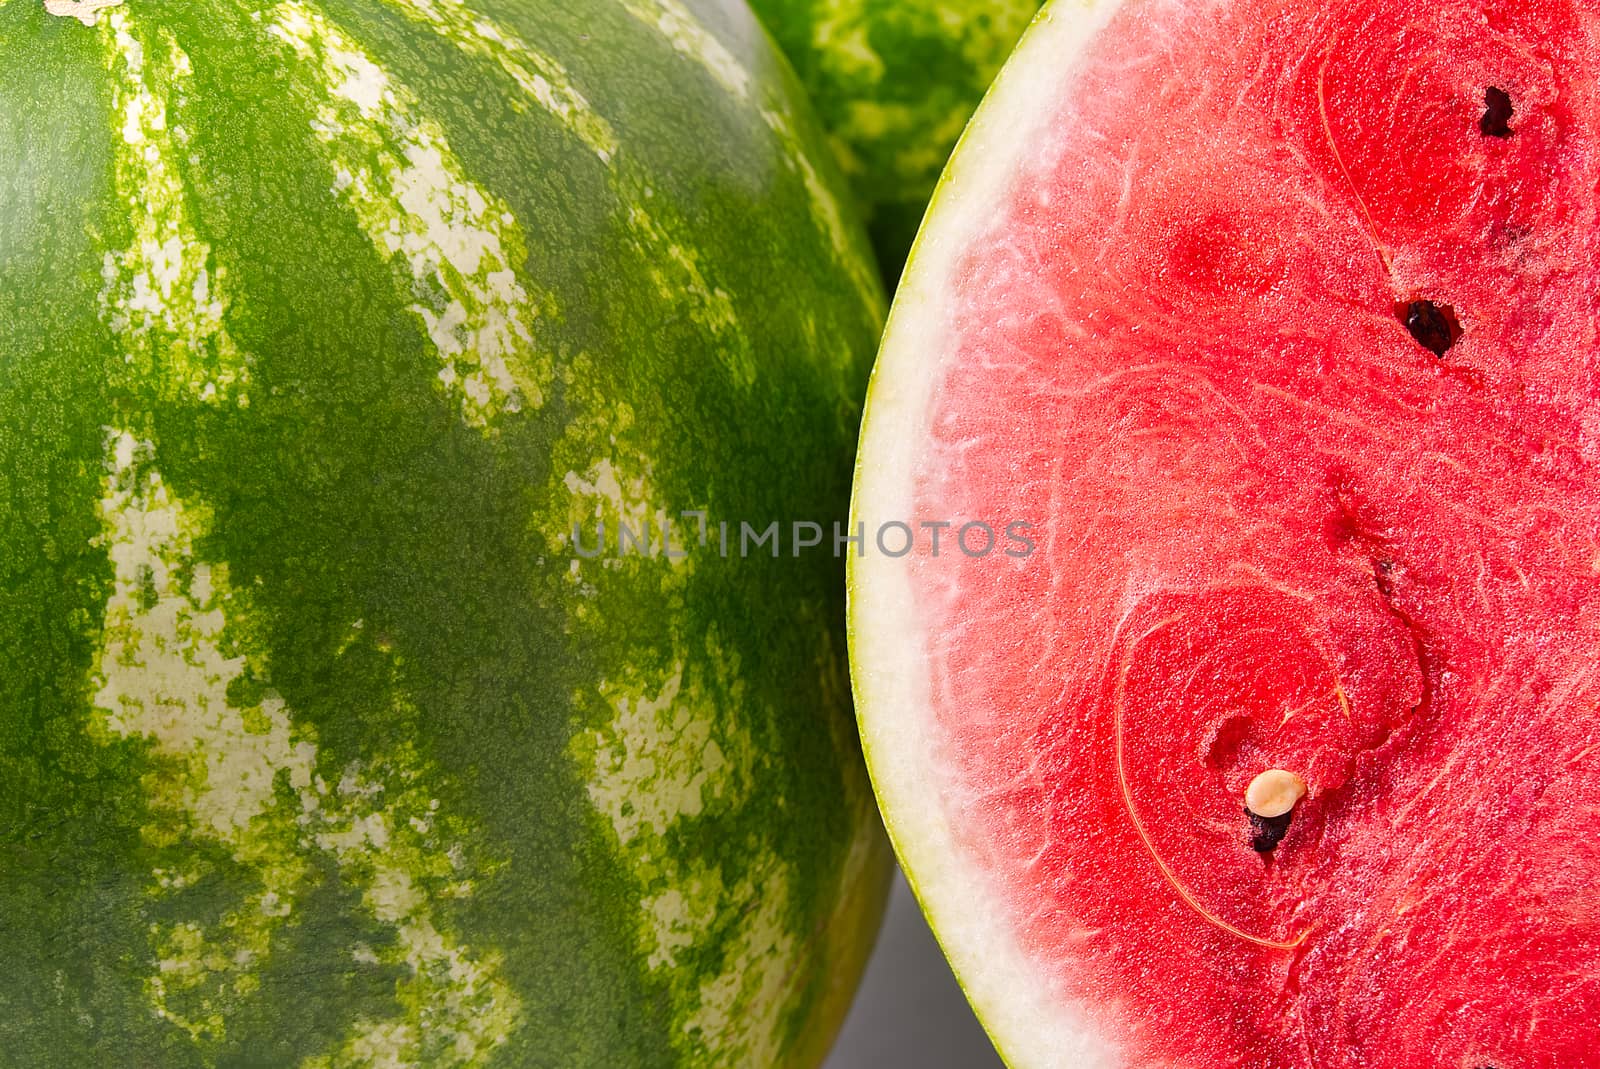 Fresh organic green watermelon and sliced half of watermelon with red texture, close-up